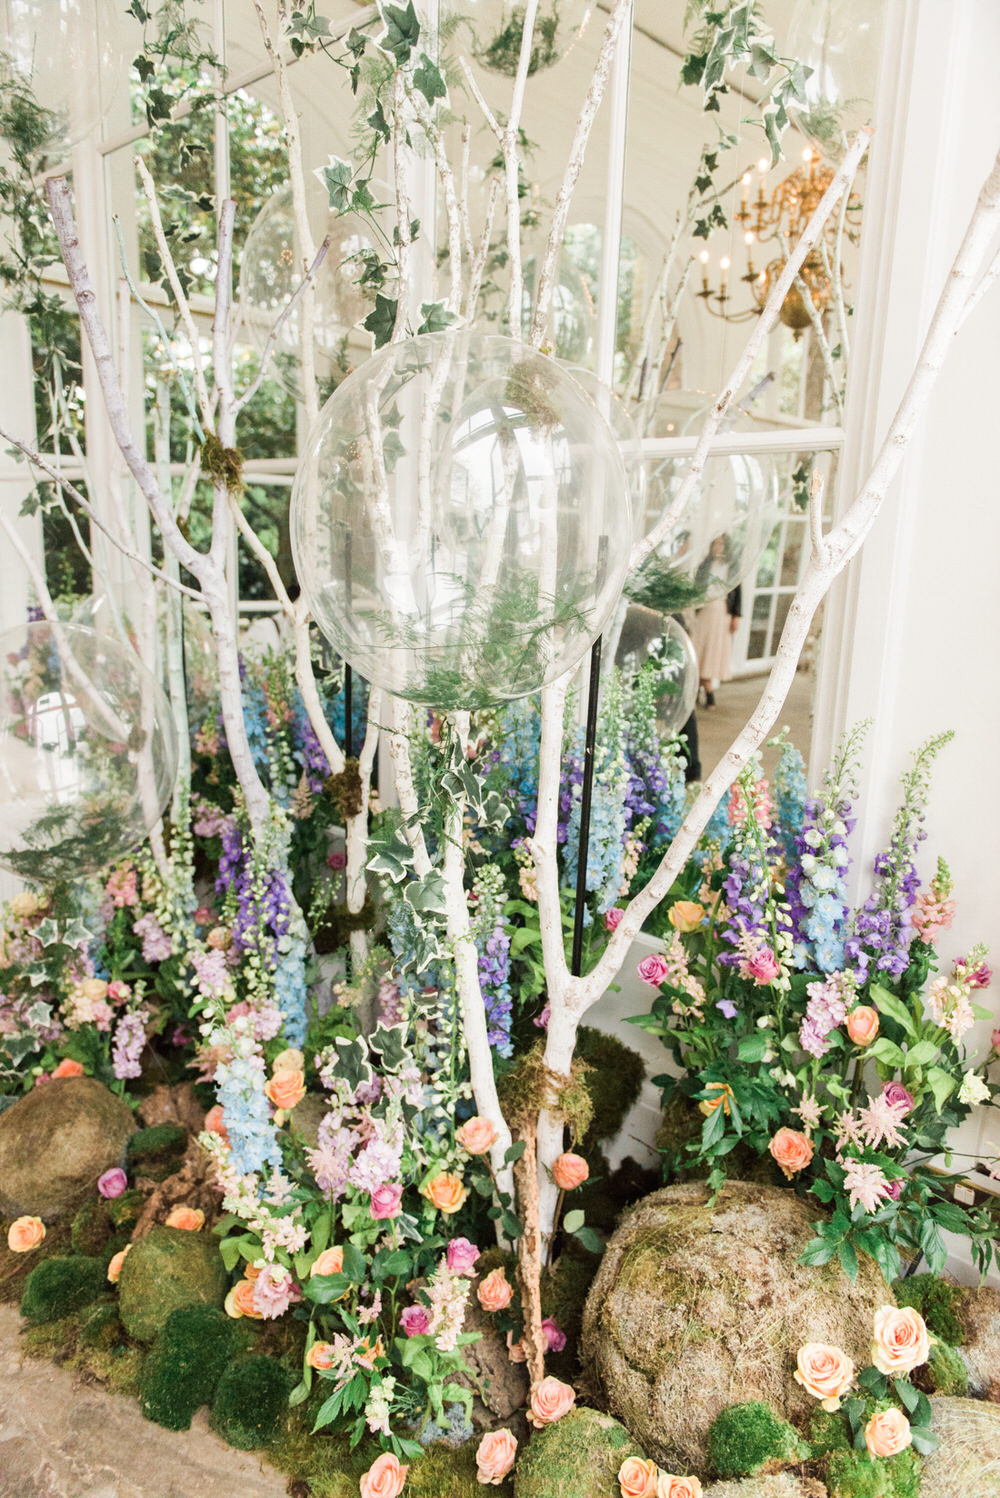 Stunning floral display | Pastel wildflower Display | Floral centrepieces | Wildflower centrepiece | Summer florals | Childrens Party | A Midsummer nights dream inspired children's birthday party with stunning floral, fairy entertainment, crafts and a picnic. Photos by Kate Nielen.